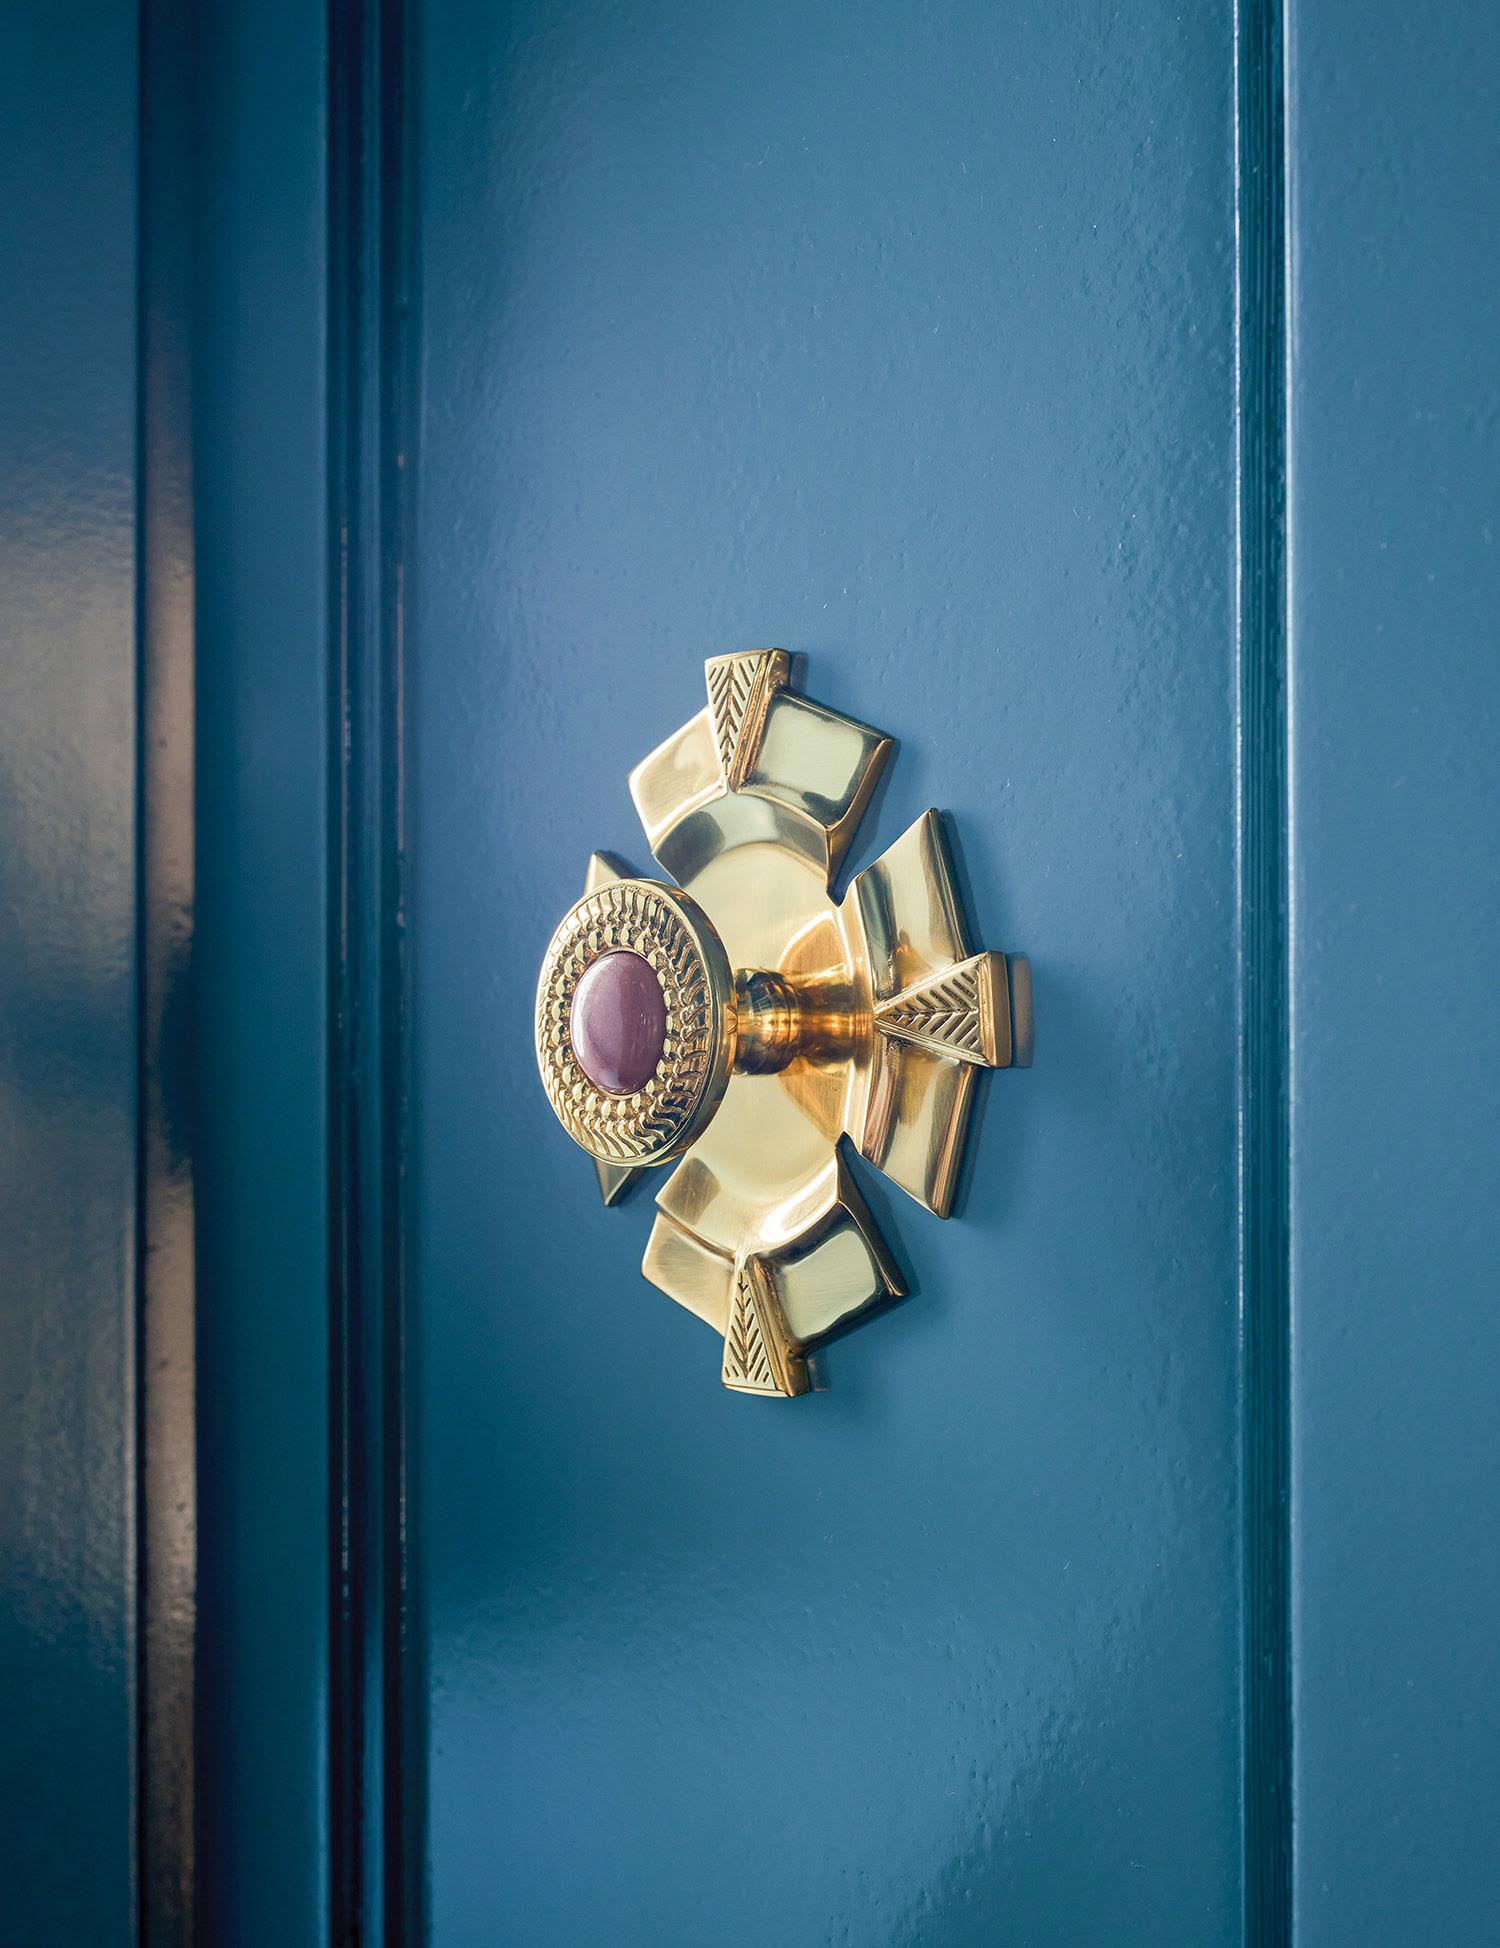 A gold knob with a purple jeweled center on a blue cabinet.